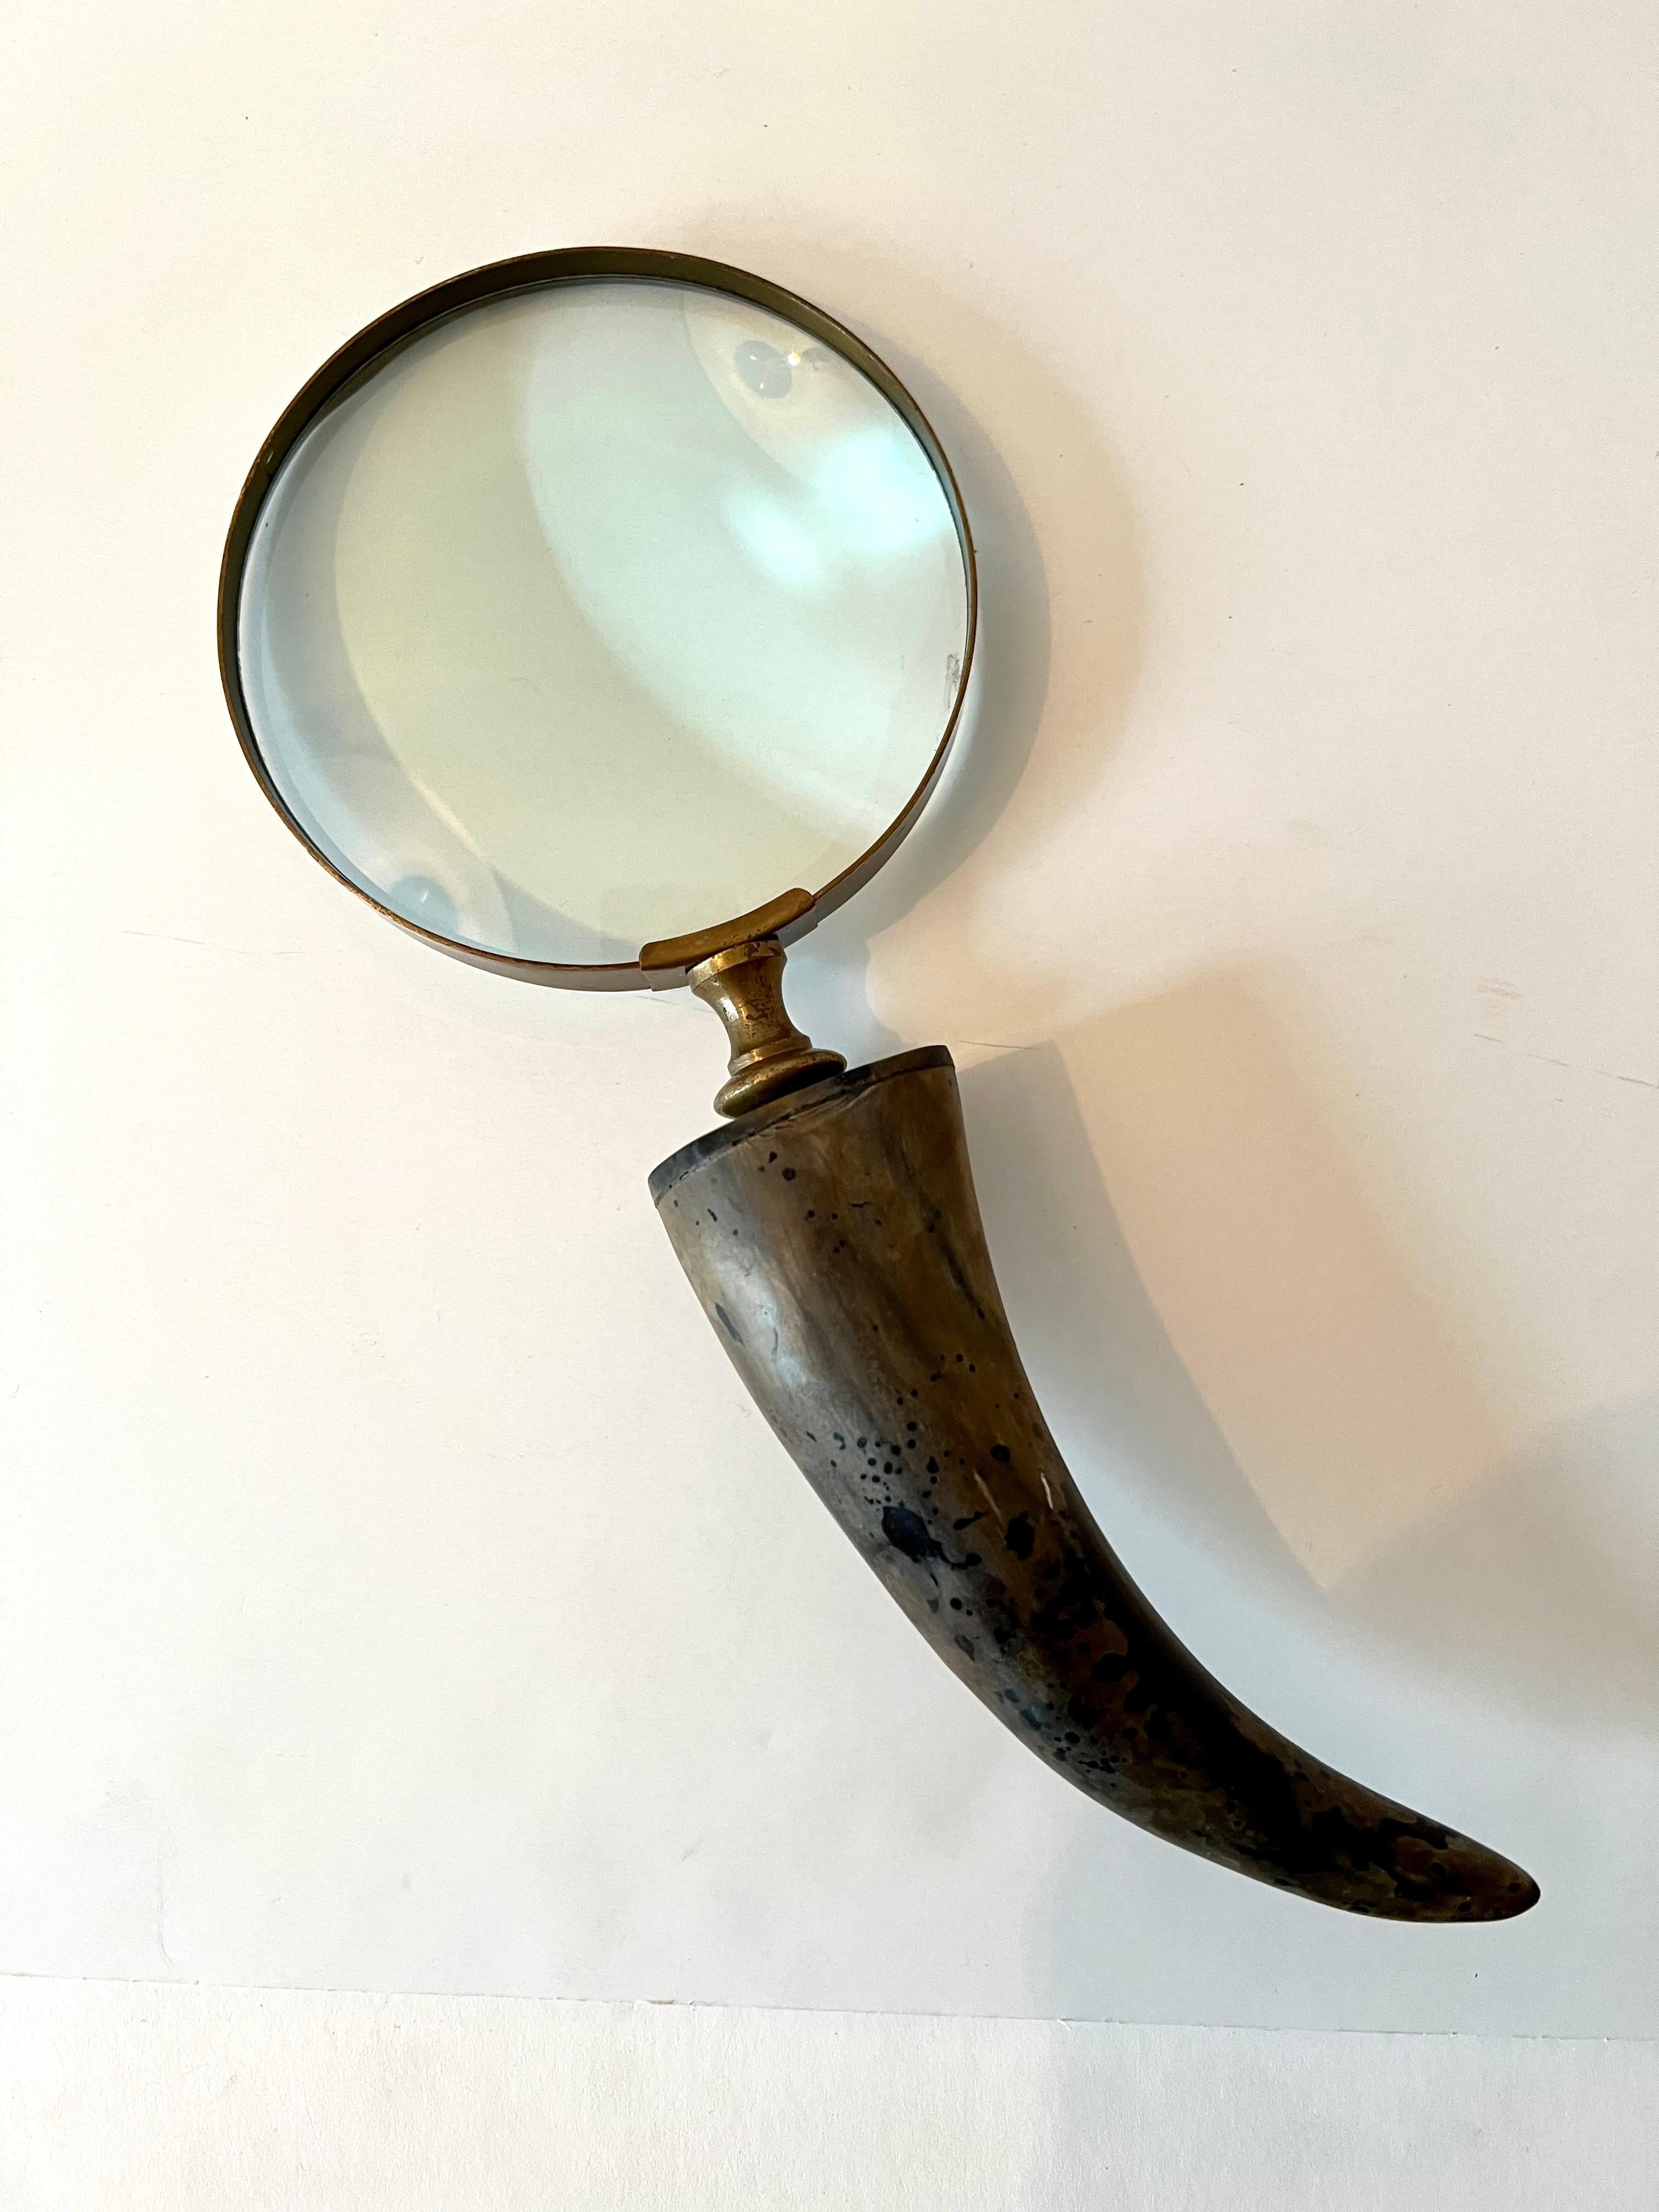 Horn Handle desk style magnifying glass with brass framework and stem. 

A compliment to any desk or work station, especially those in a Ralph Laurent or more rustic setting, but could also easily work in a modern and architectural environment.